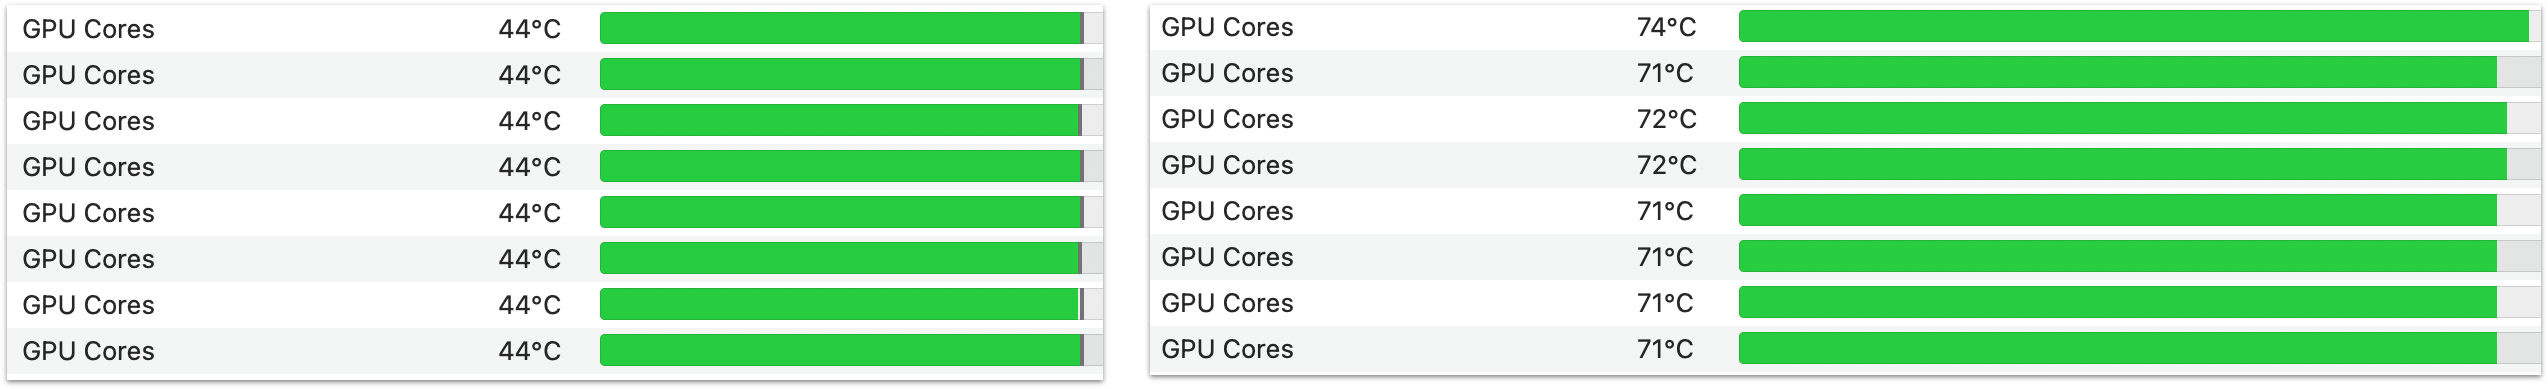 TG Pro showing GPU core temperatures on the M3 Max when at low and high usage.